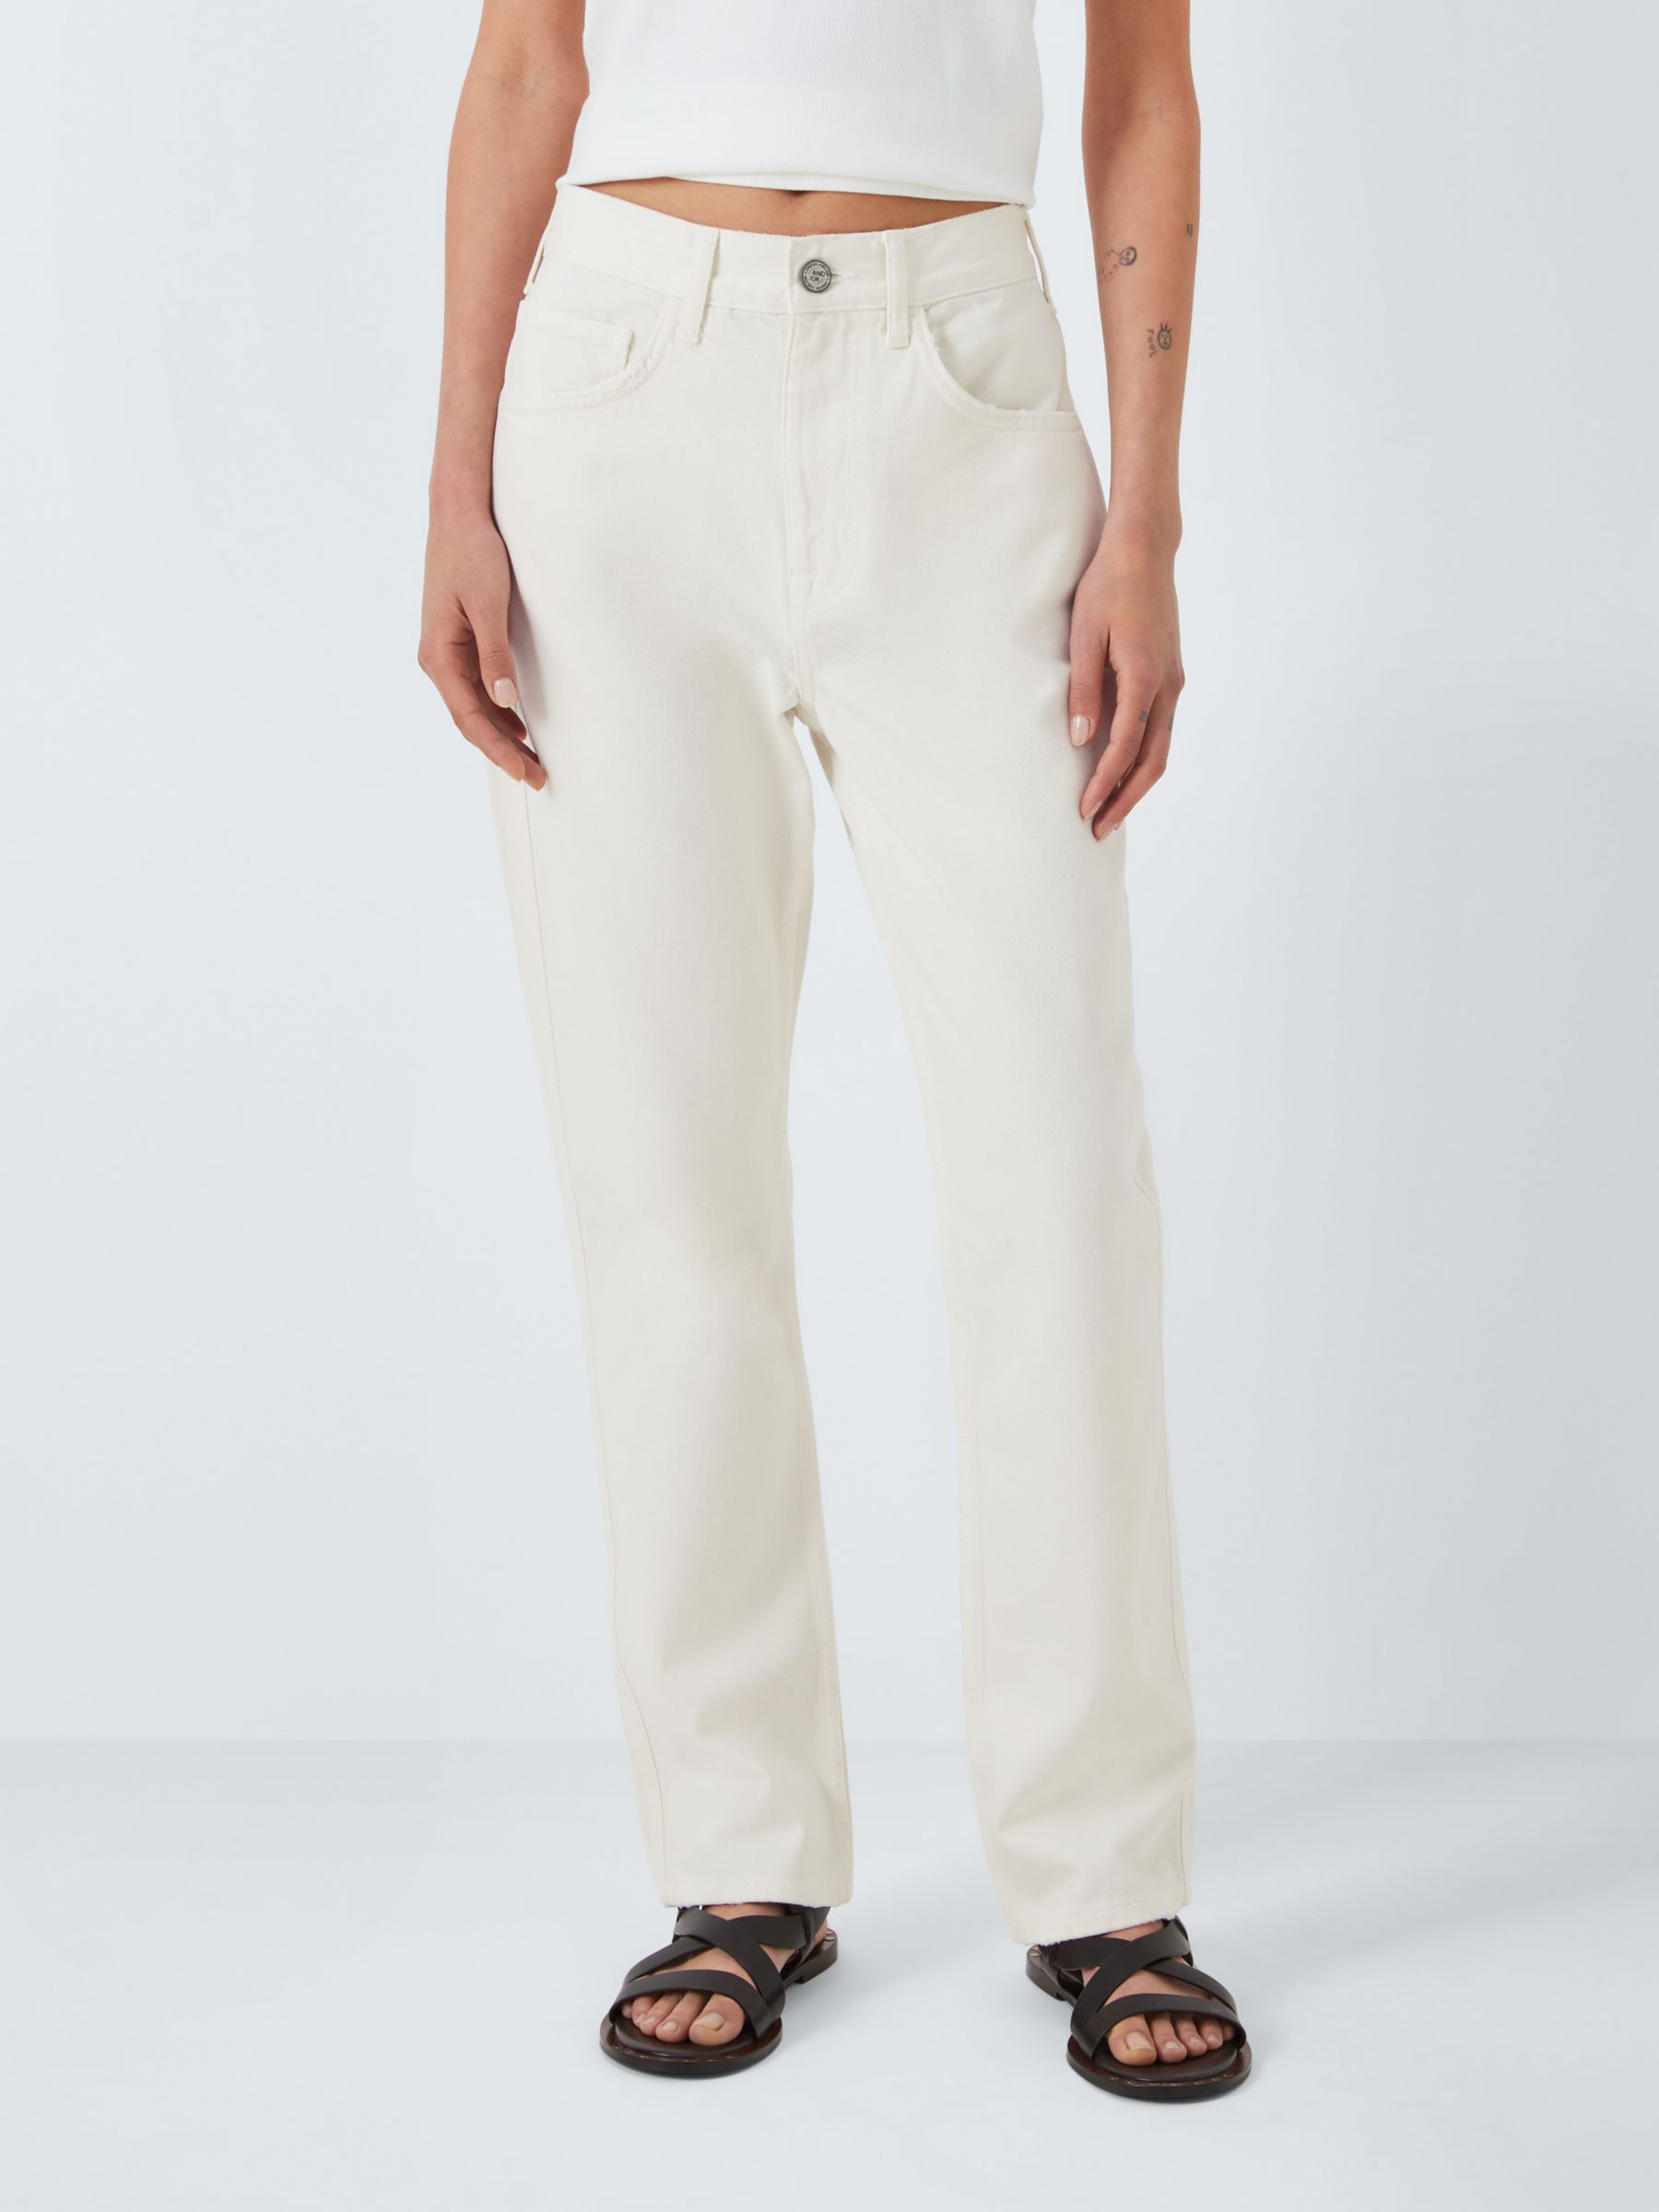 AND/OR Melrose Organic Cotton Straight Cut Jeans, Soft White, 28R